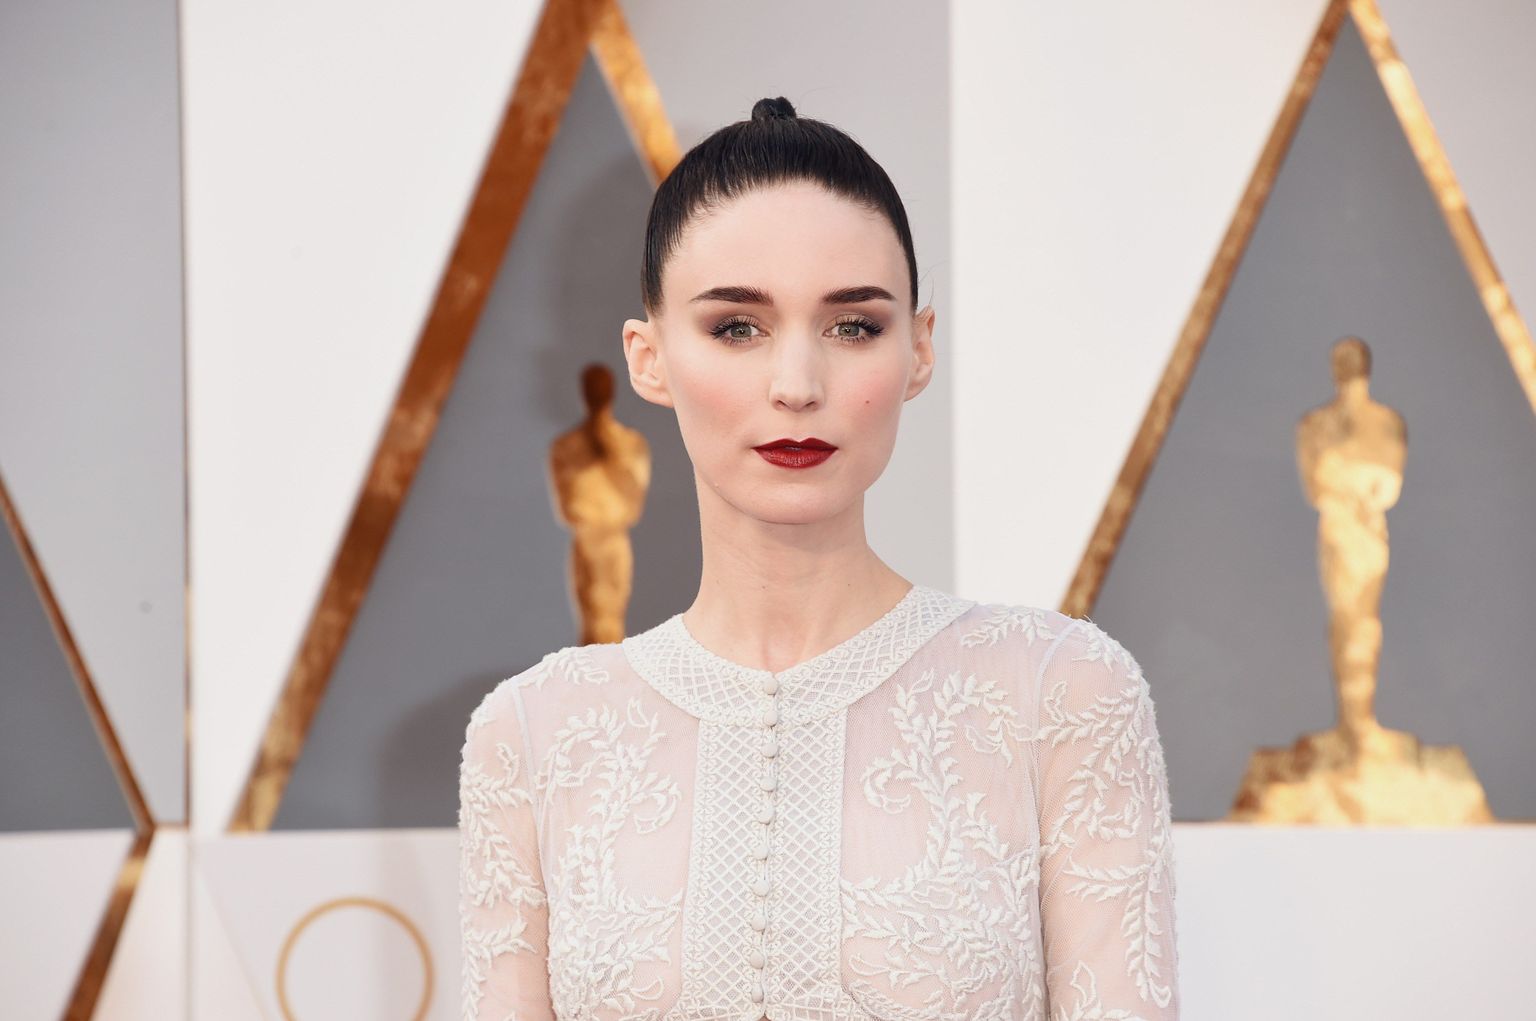 HOLLYWOOD, CA - FEBRUARY 28: Actress Rooney Mara attends the 88th Annual Academy Awards at Hollywood & Highland Center on February 28, 2016 in Hollywood, California.   Jason Merritt/Getty Images/AFP
== FOR NEWSPAPERS, INTERNET, TELCOS & TELEVISION USE ONLY ==